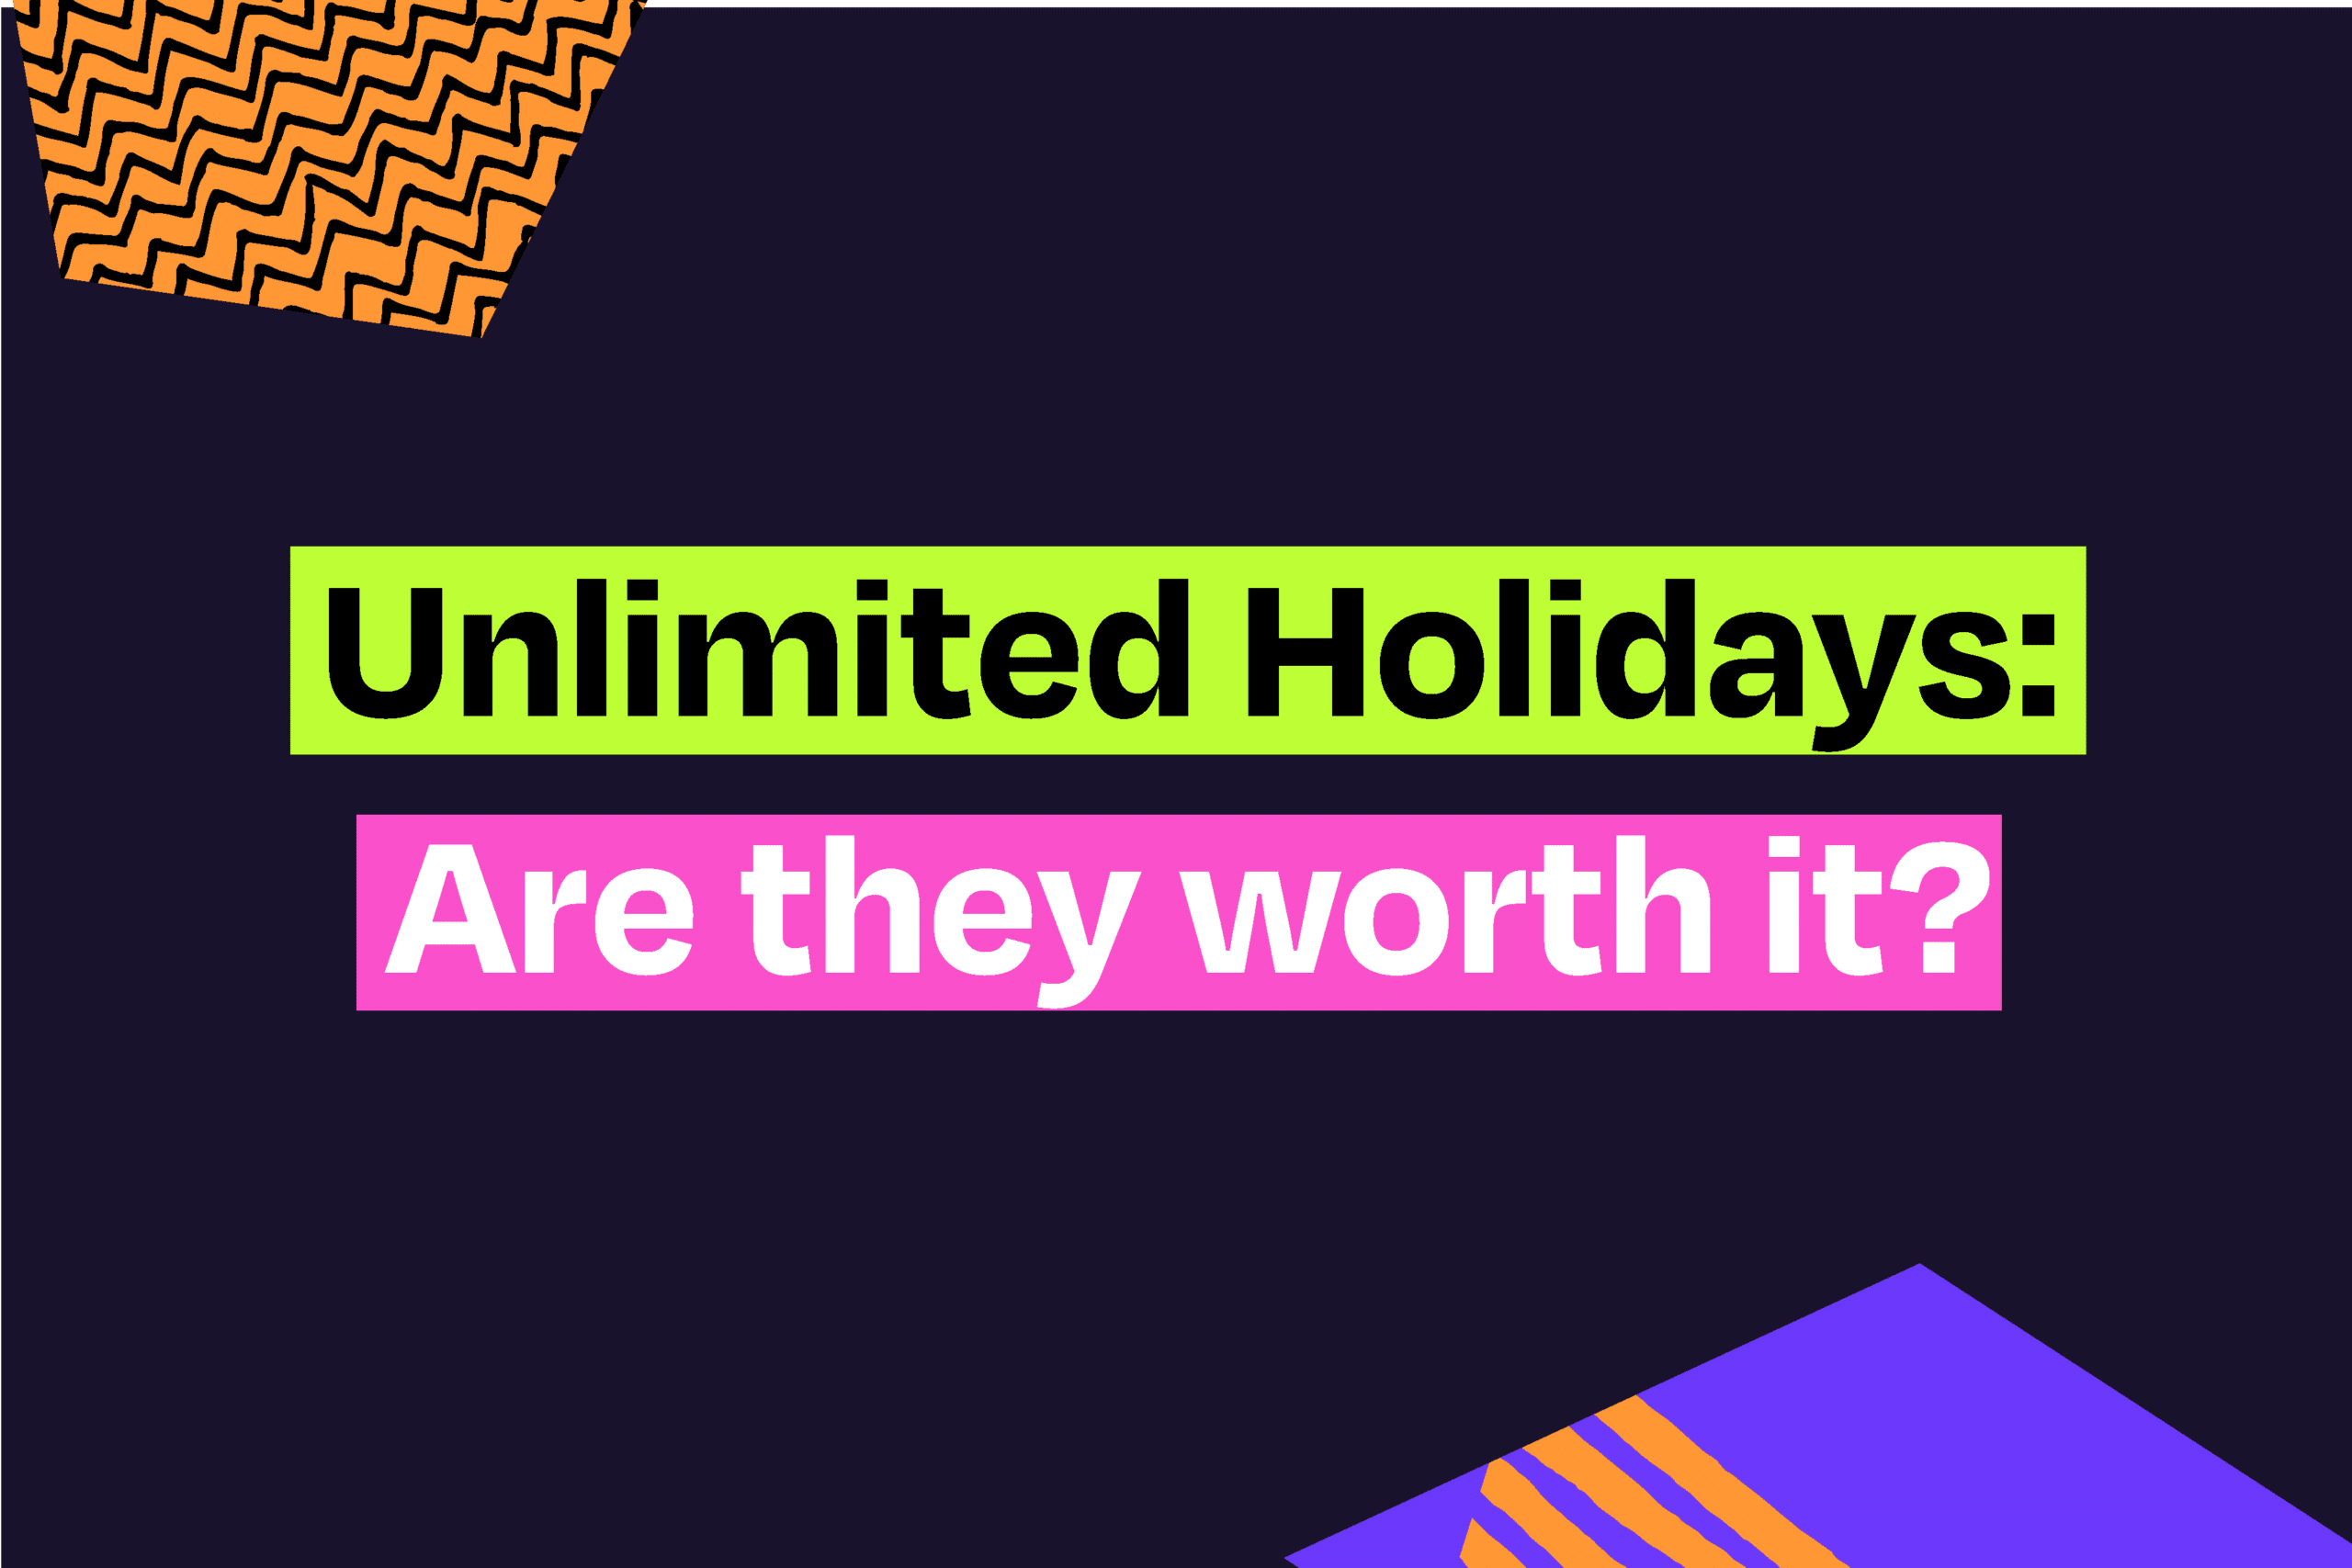 Dark background with bright highlighted text of "Unlimited Holidays: Are they worth it?"